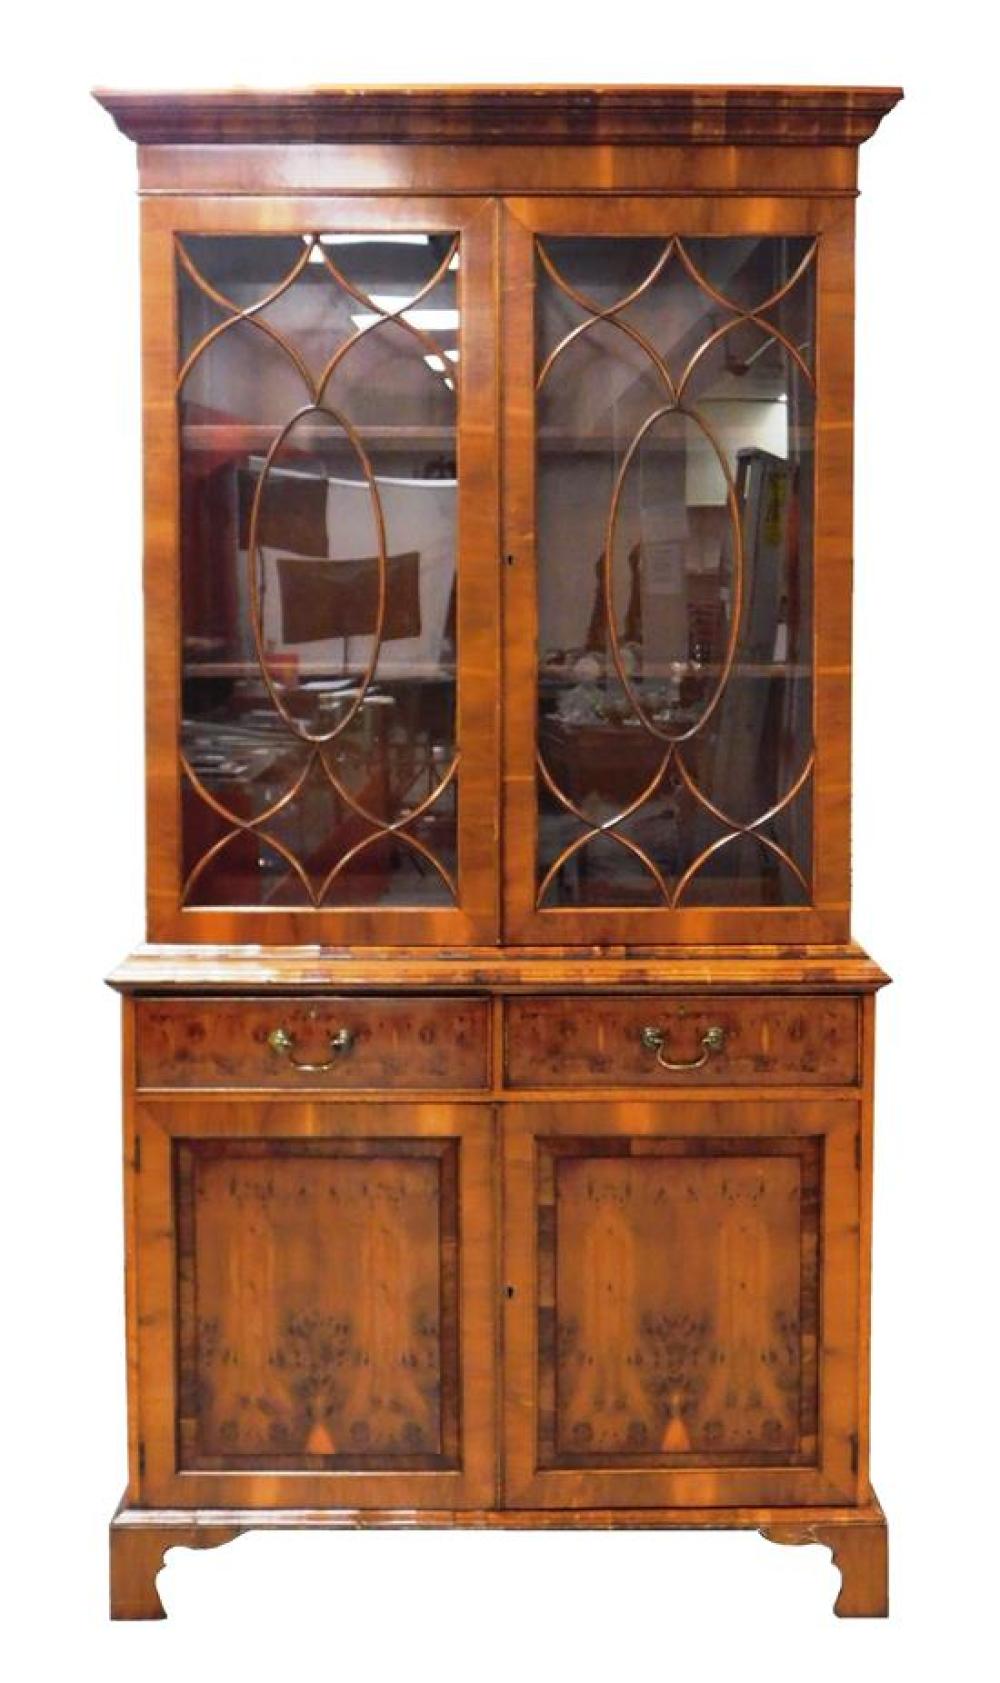 GEORGIAN STYLE GLASS FRONT CABINET